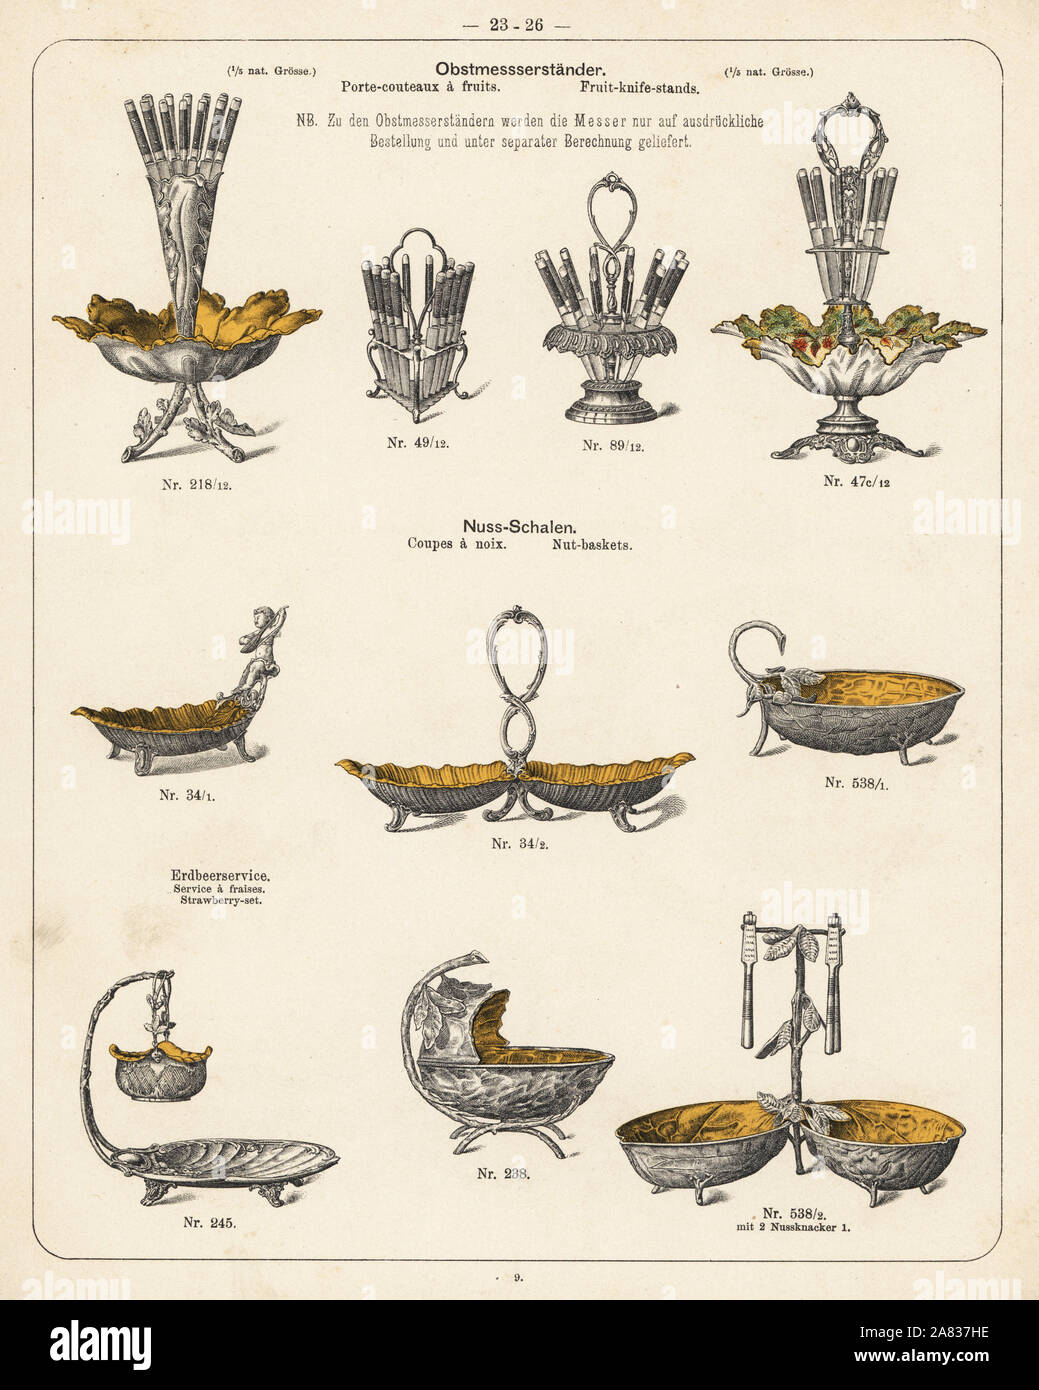 https://c8.alamy.com/comp/2A837HE/fruit-knife-stand-nut-basket-strawberry-set-etc-lithograph-from-a-catalog-of-metal-products-manufactured-by-wuerttemberg-metalware-factory-geislingen-germany-1896-2A837HE.jpg